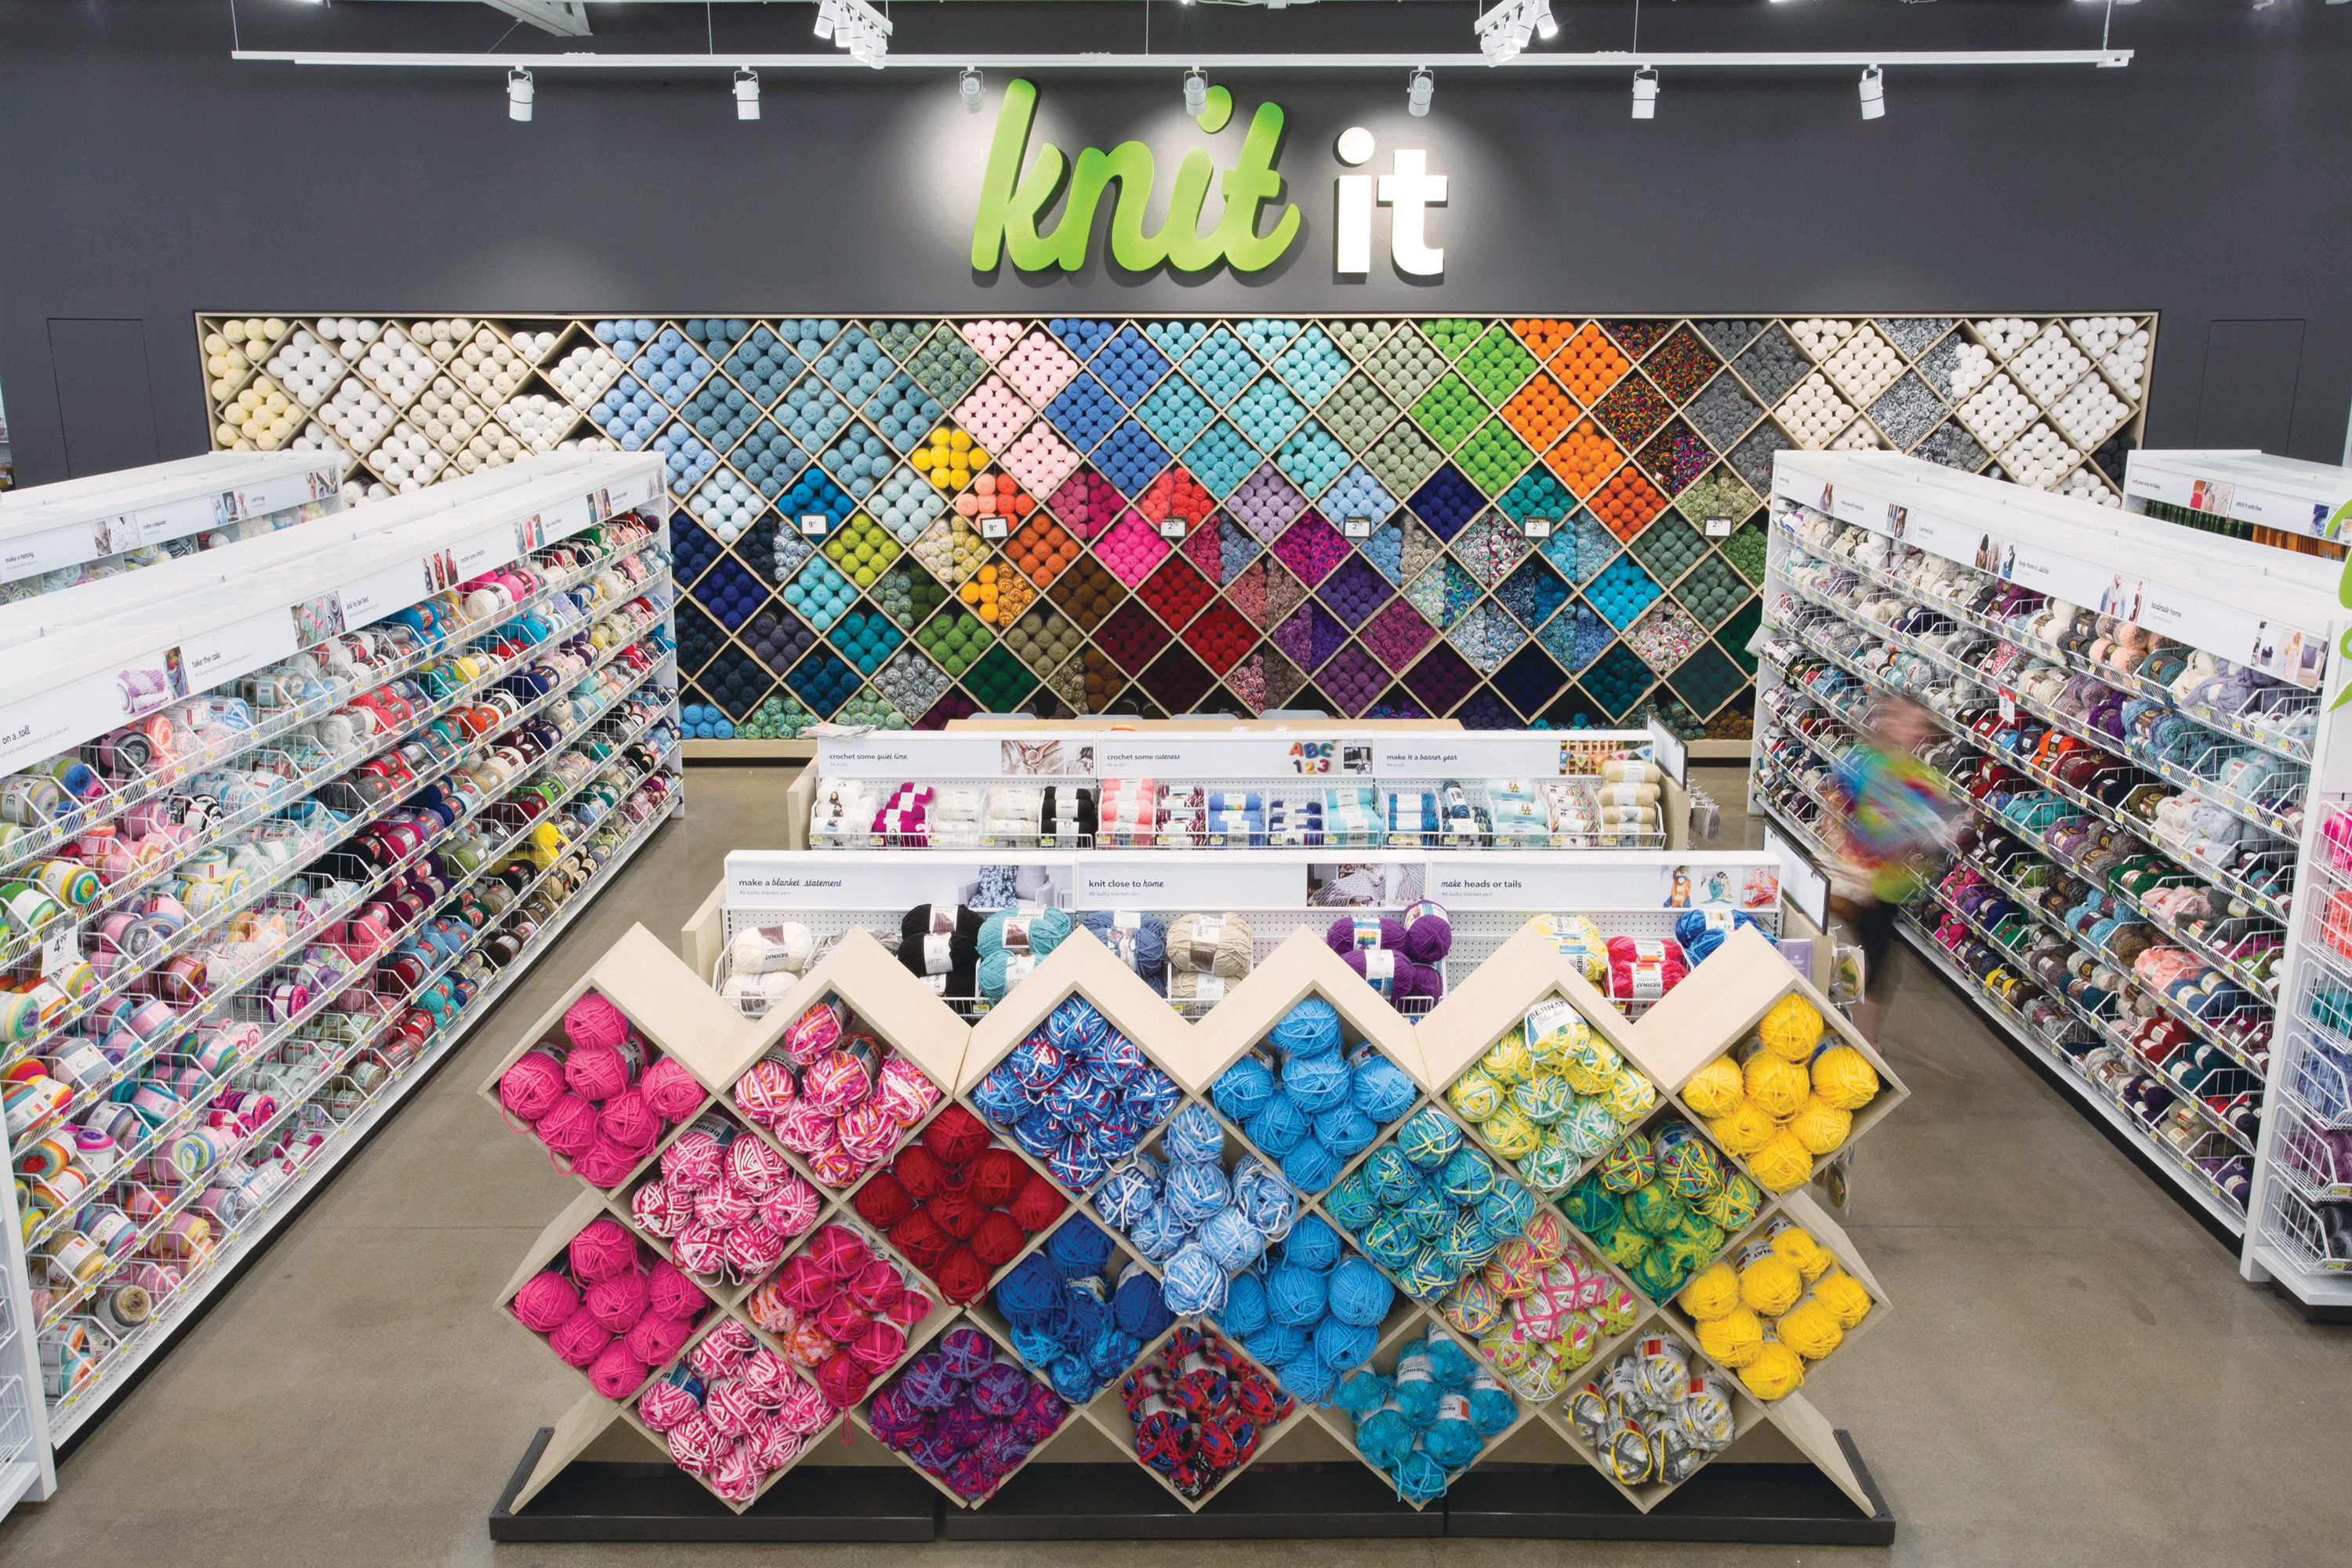 Joann Unveils Concept Store Focused On Inspiring Creativity, Community |  Business Wire